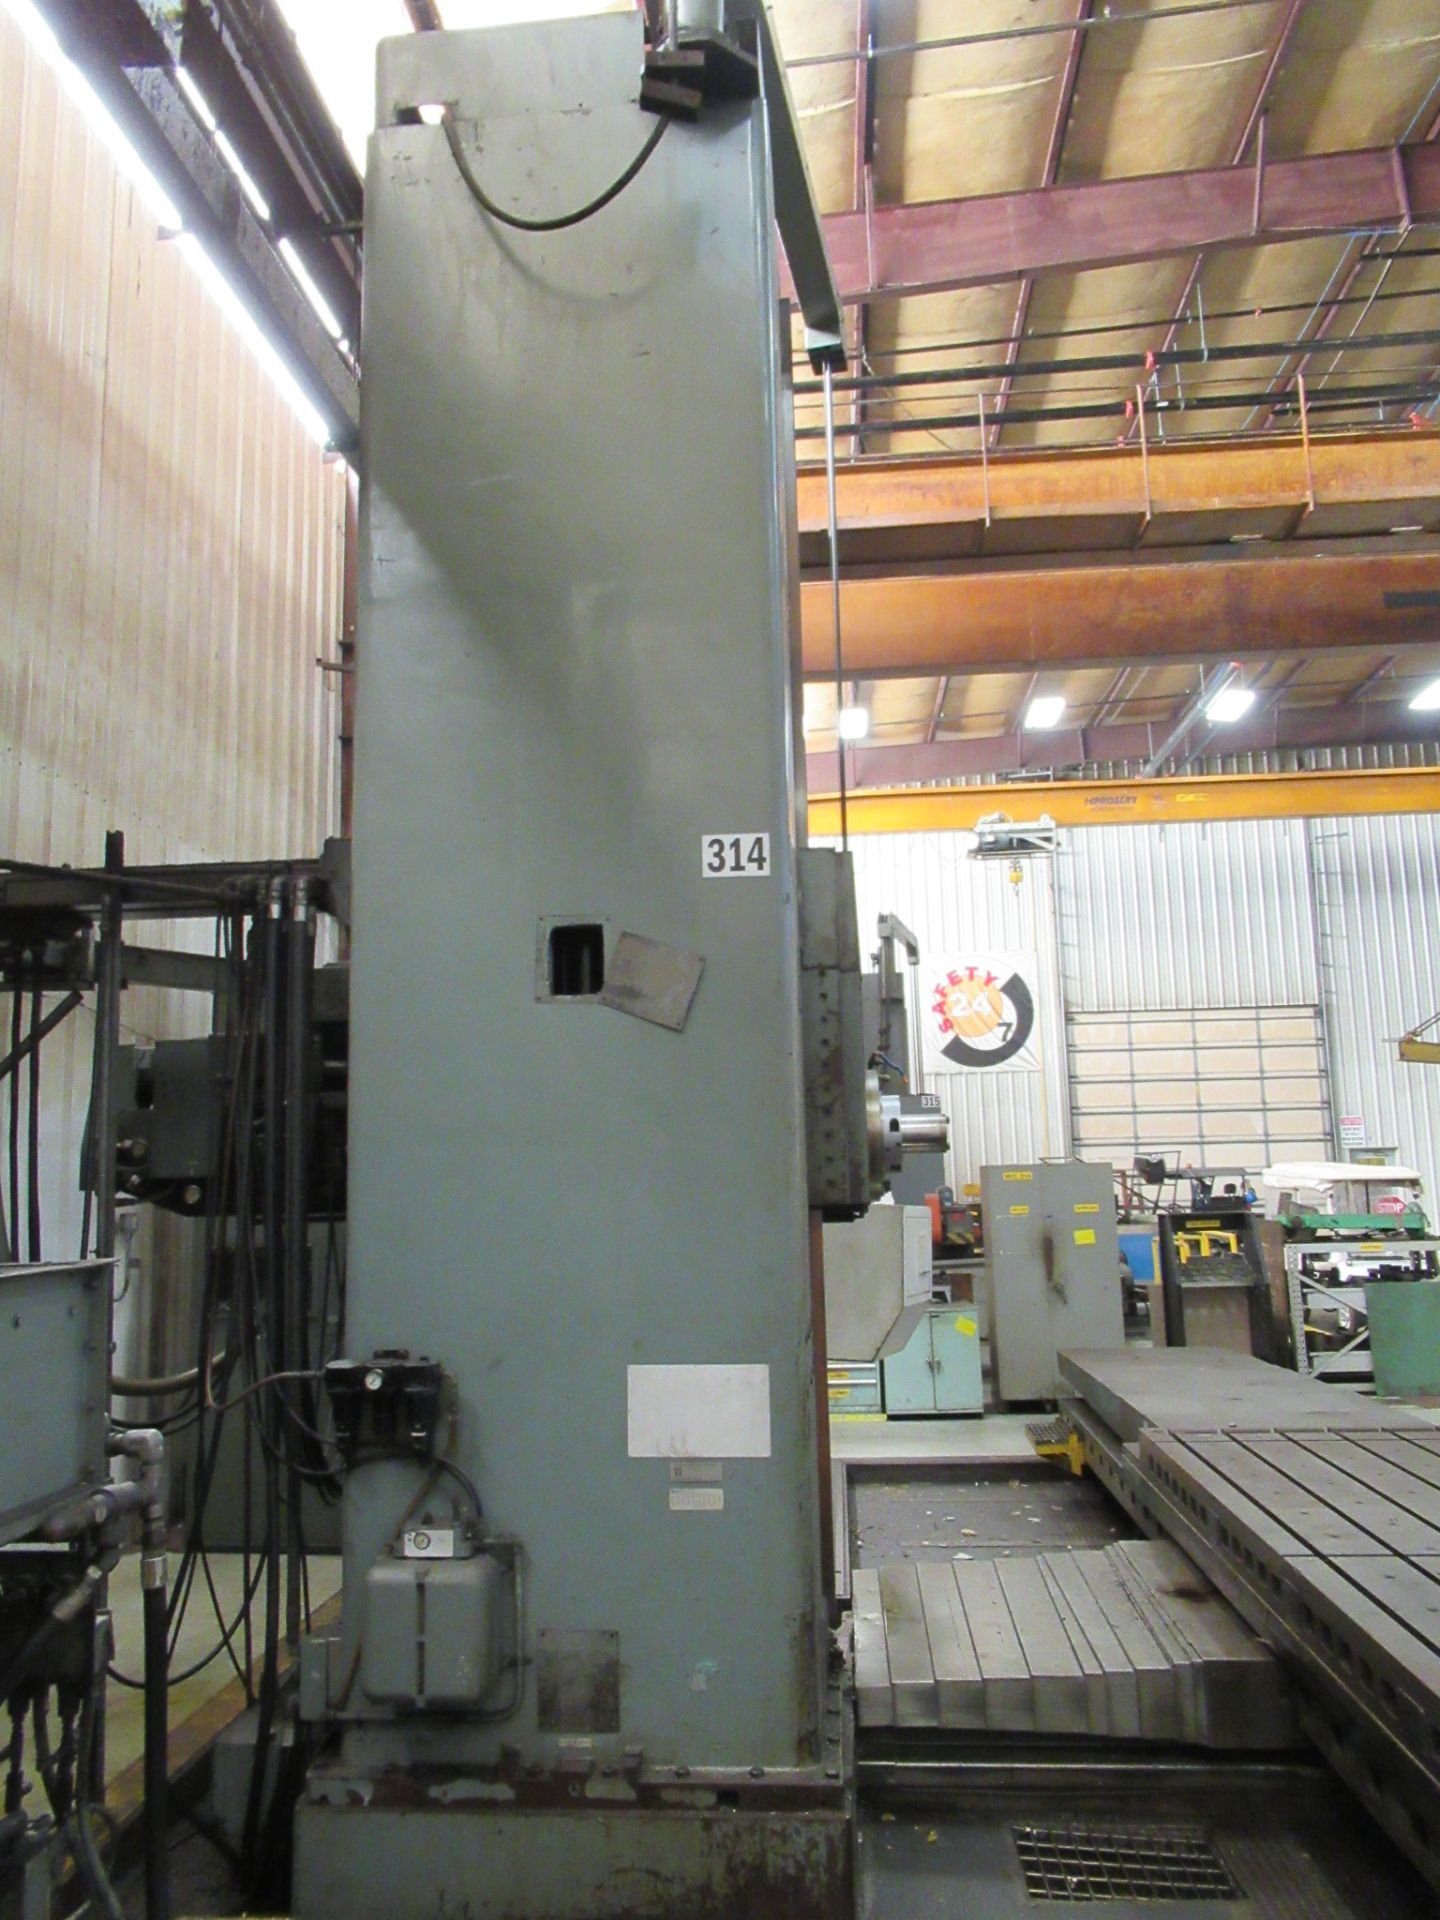 CNC HORIZONTAL BORING MILL, 6" GIDDINGS & LEWIS MDL. H60-T, 60" x 120" plain table, 168" X, 156" Y- - Image 9 of 12